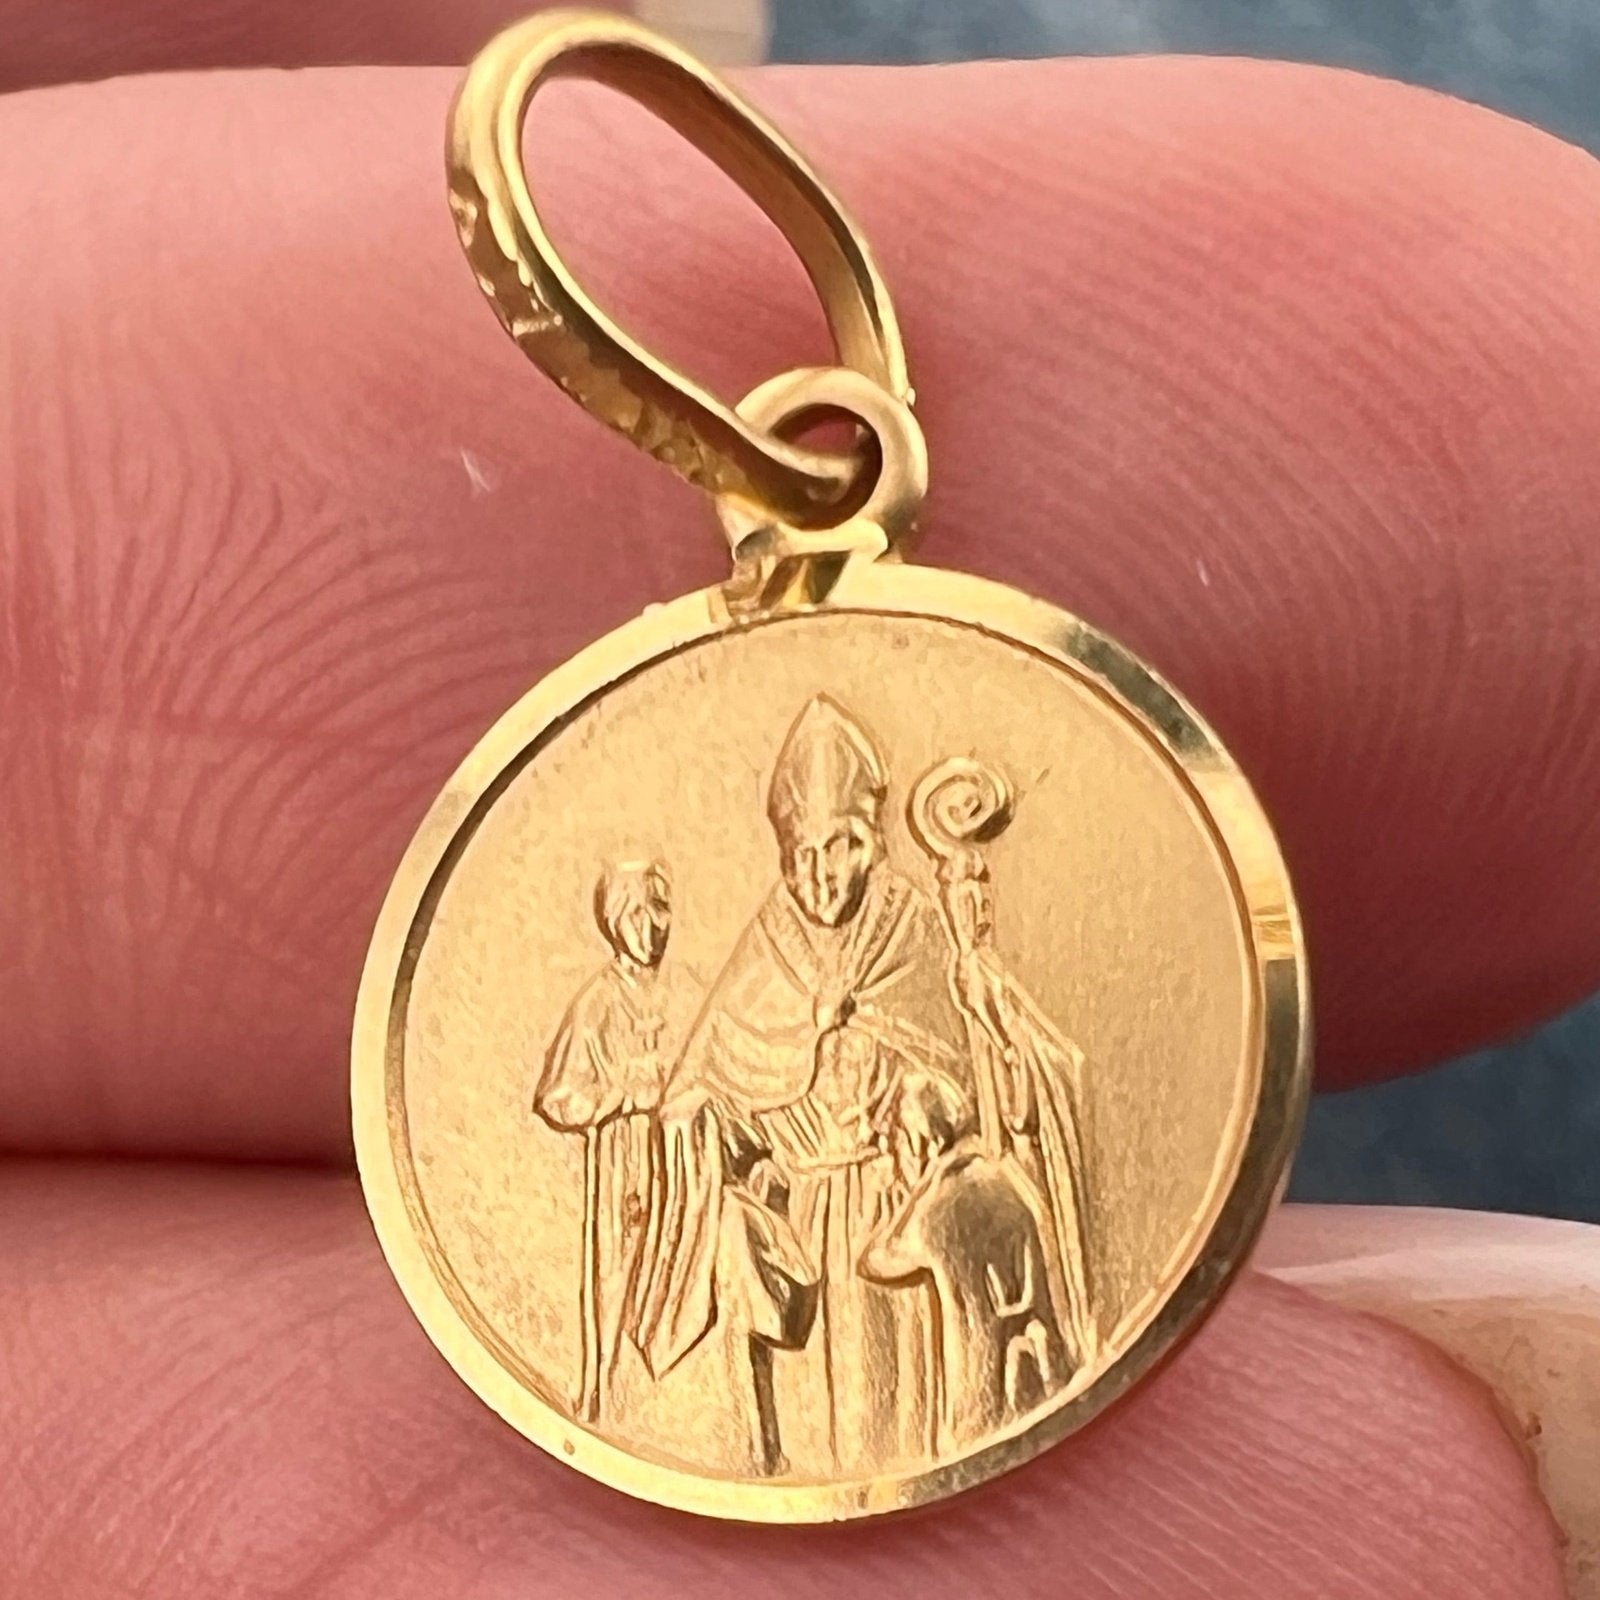 14k Yellow Gold Pope Francis Small Charm Pendant. The People's Pope